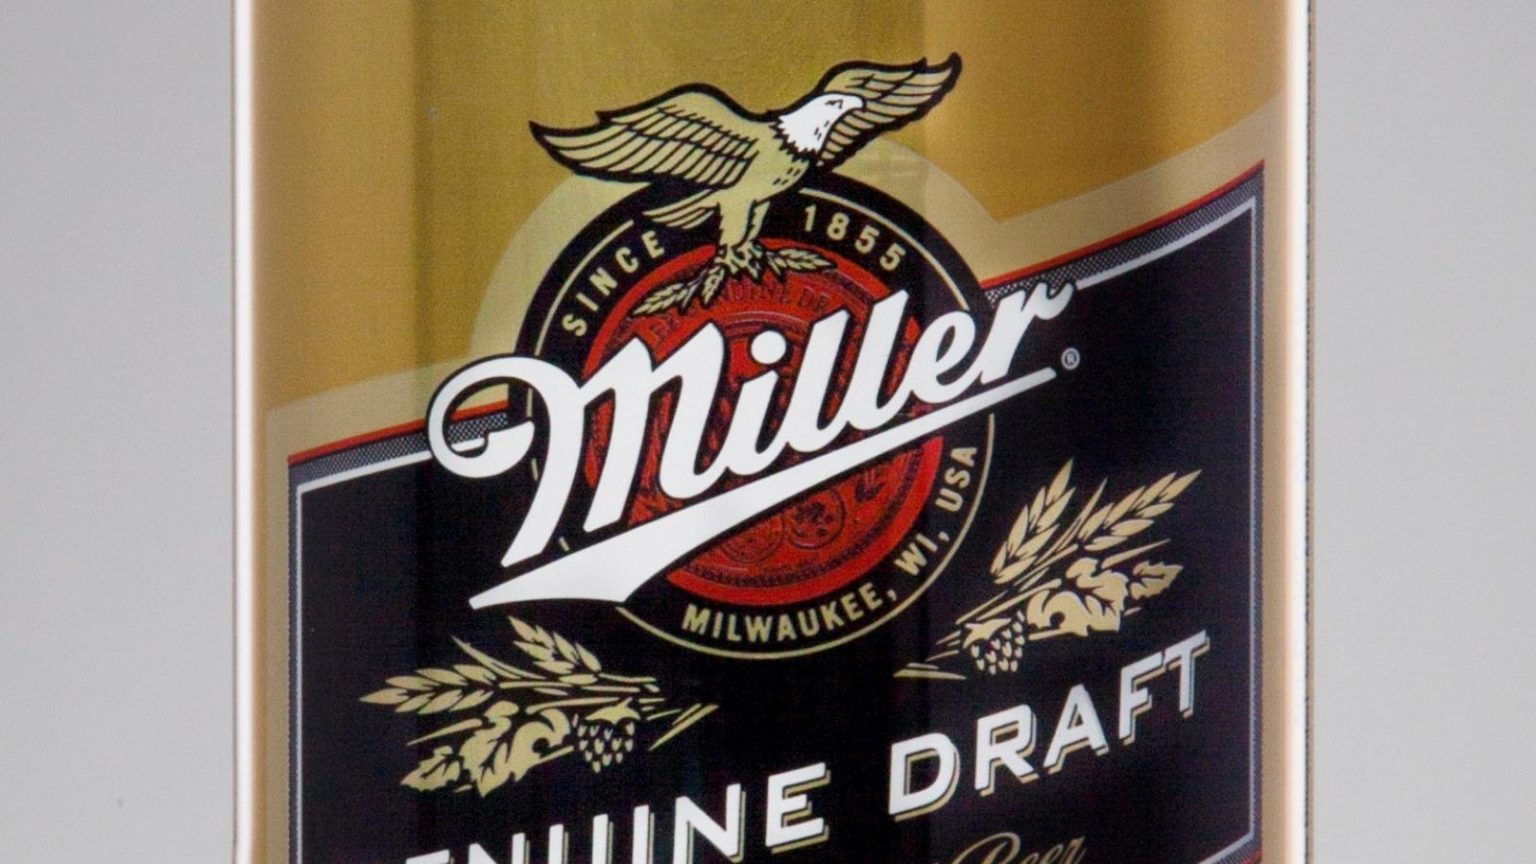 Miller 64 Review A Detailed Look At This Popular Light Lager